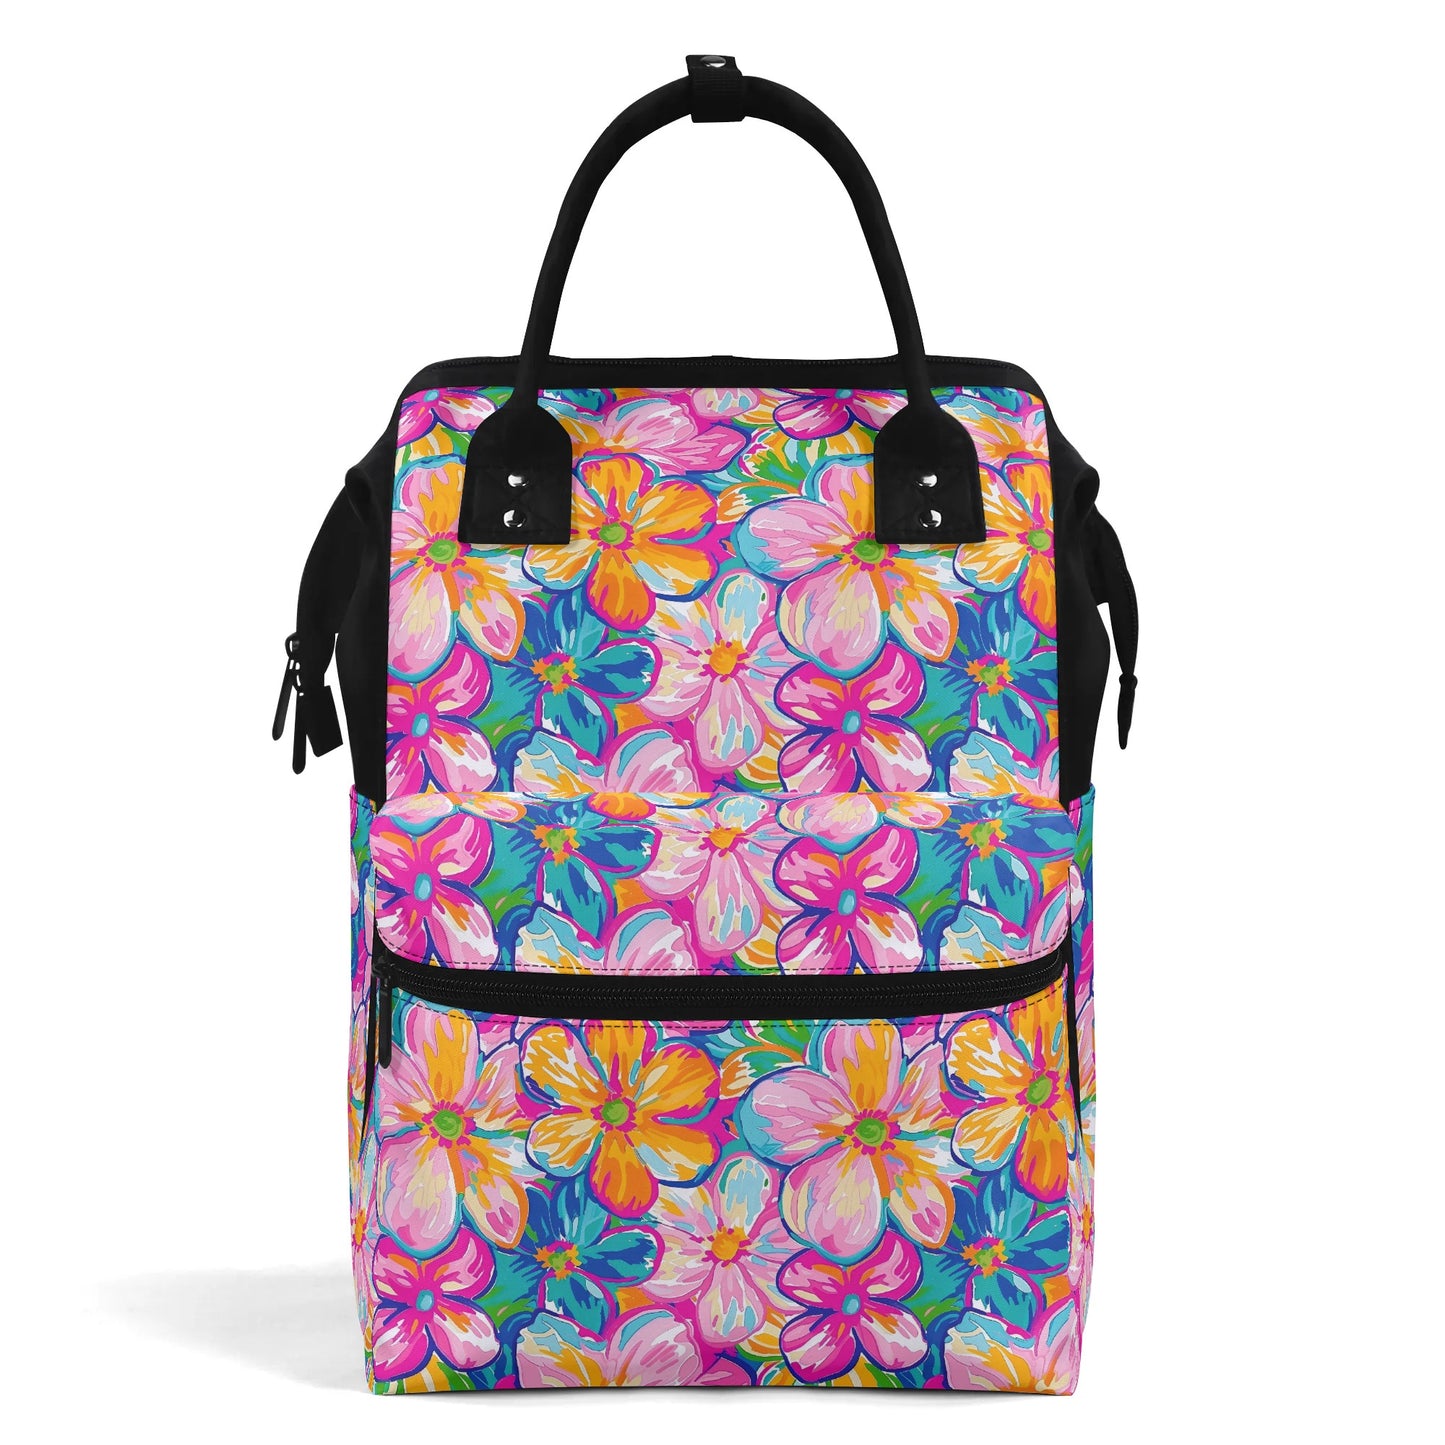 Chromatic Blossoms: Large Watercolor Flowers in Mixed Pinks, Blues, and Oranges Large Capacity Backpack Diaper Nursing Bag